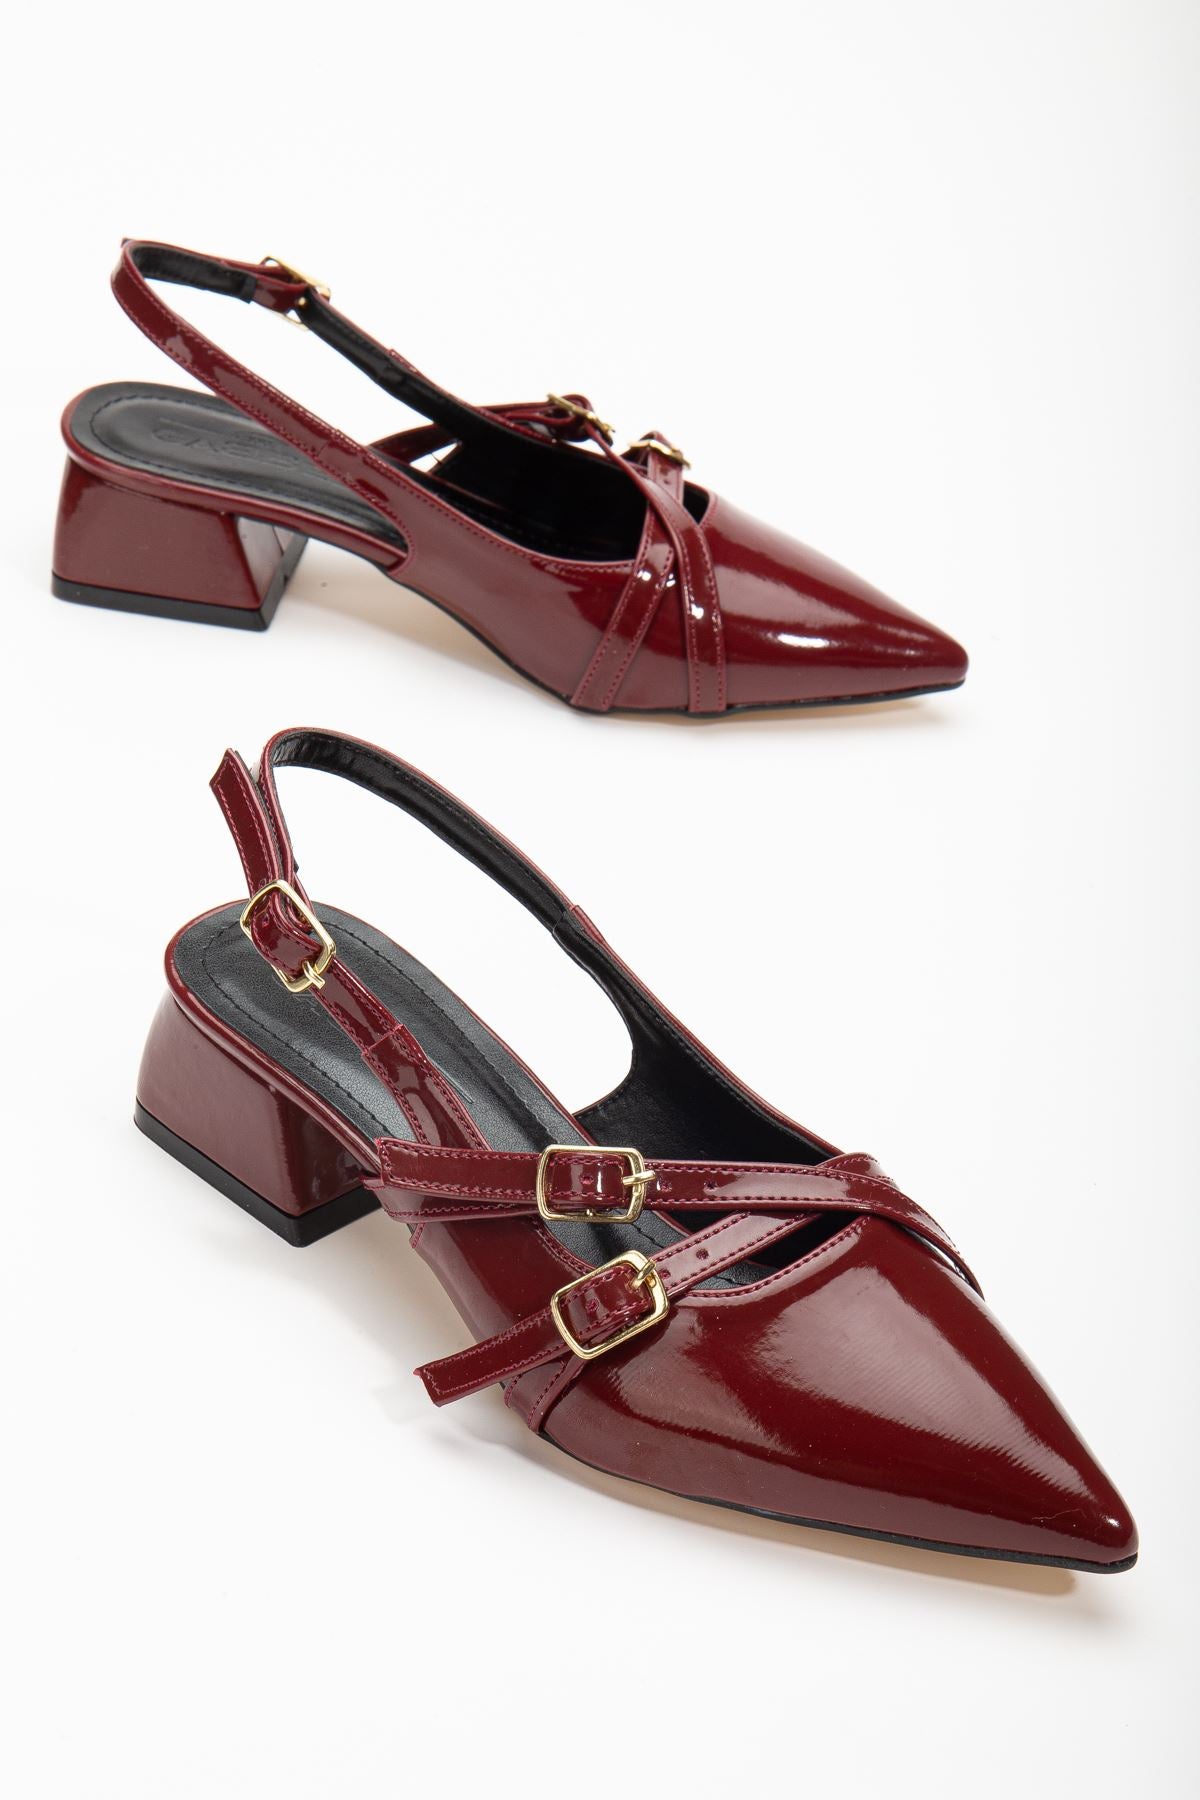 Pary Claret Red Patent Leather Women's Heeled Shoes - STREETMODE™